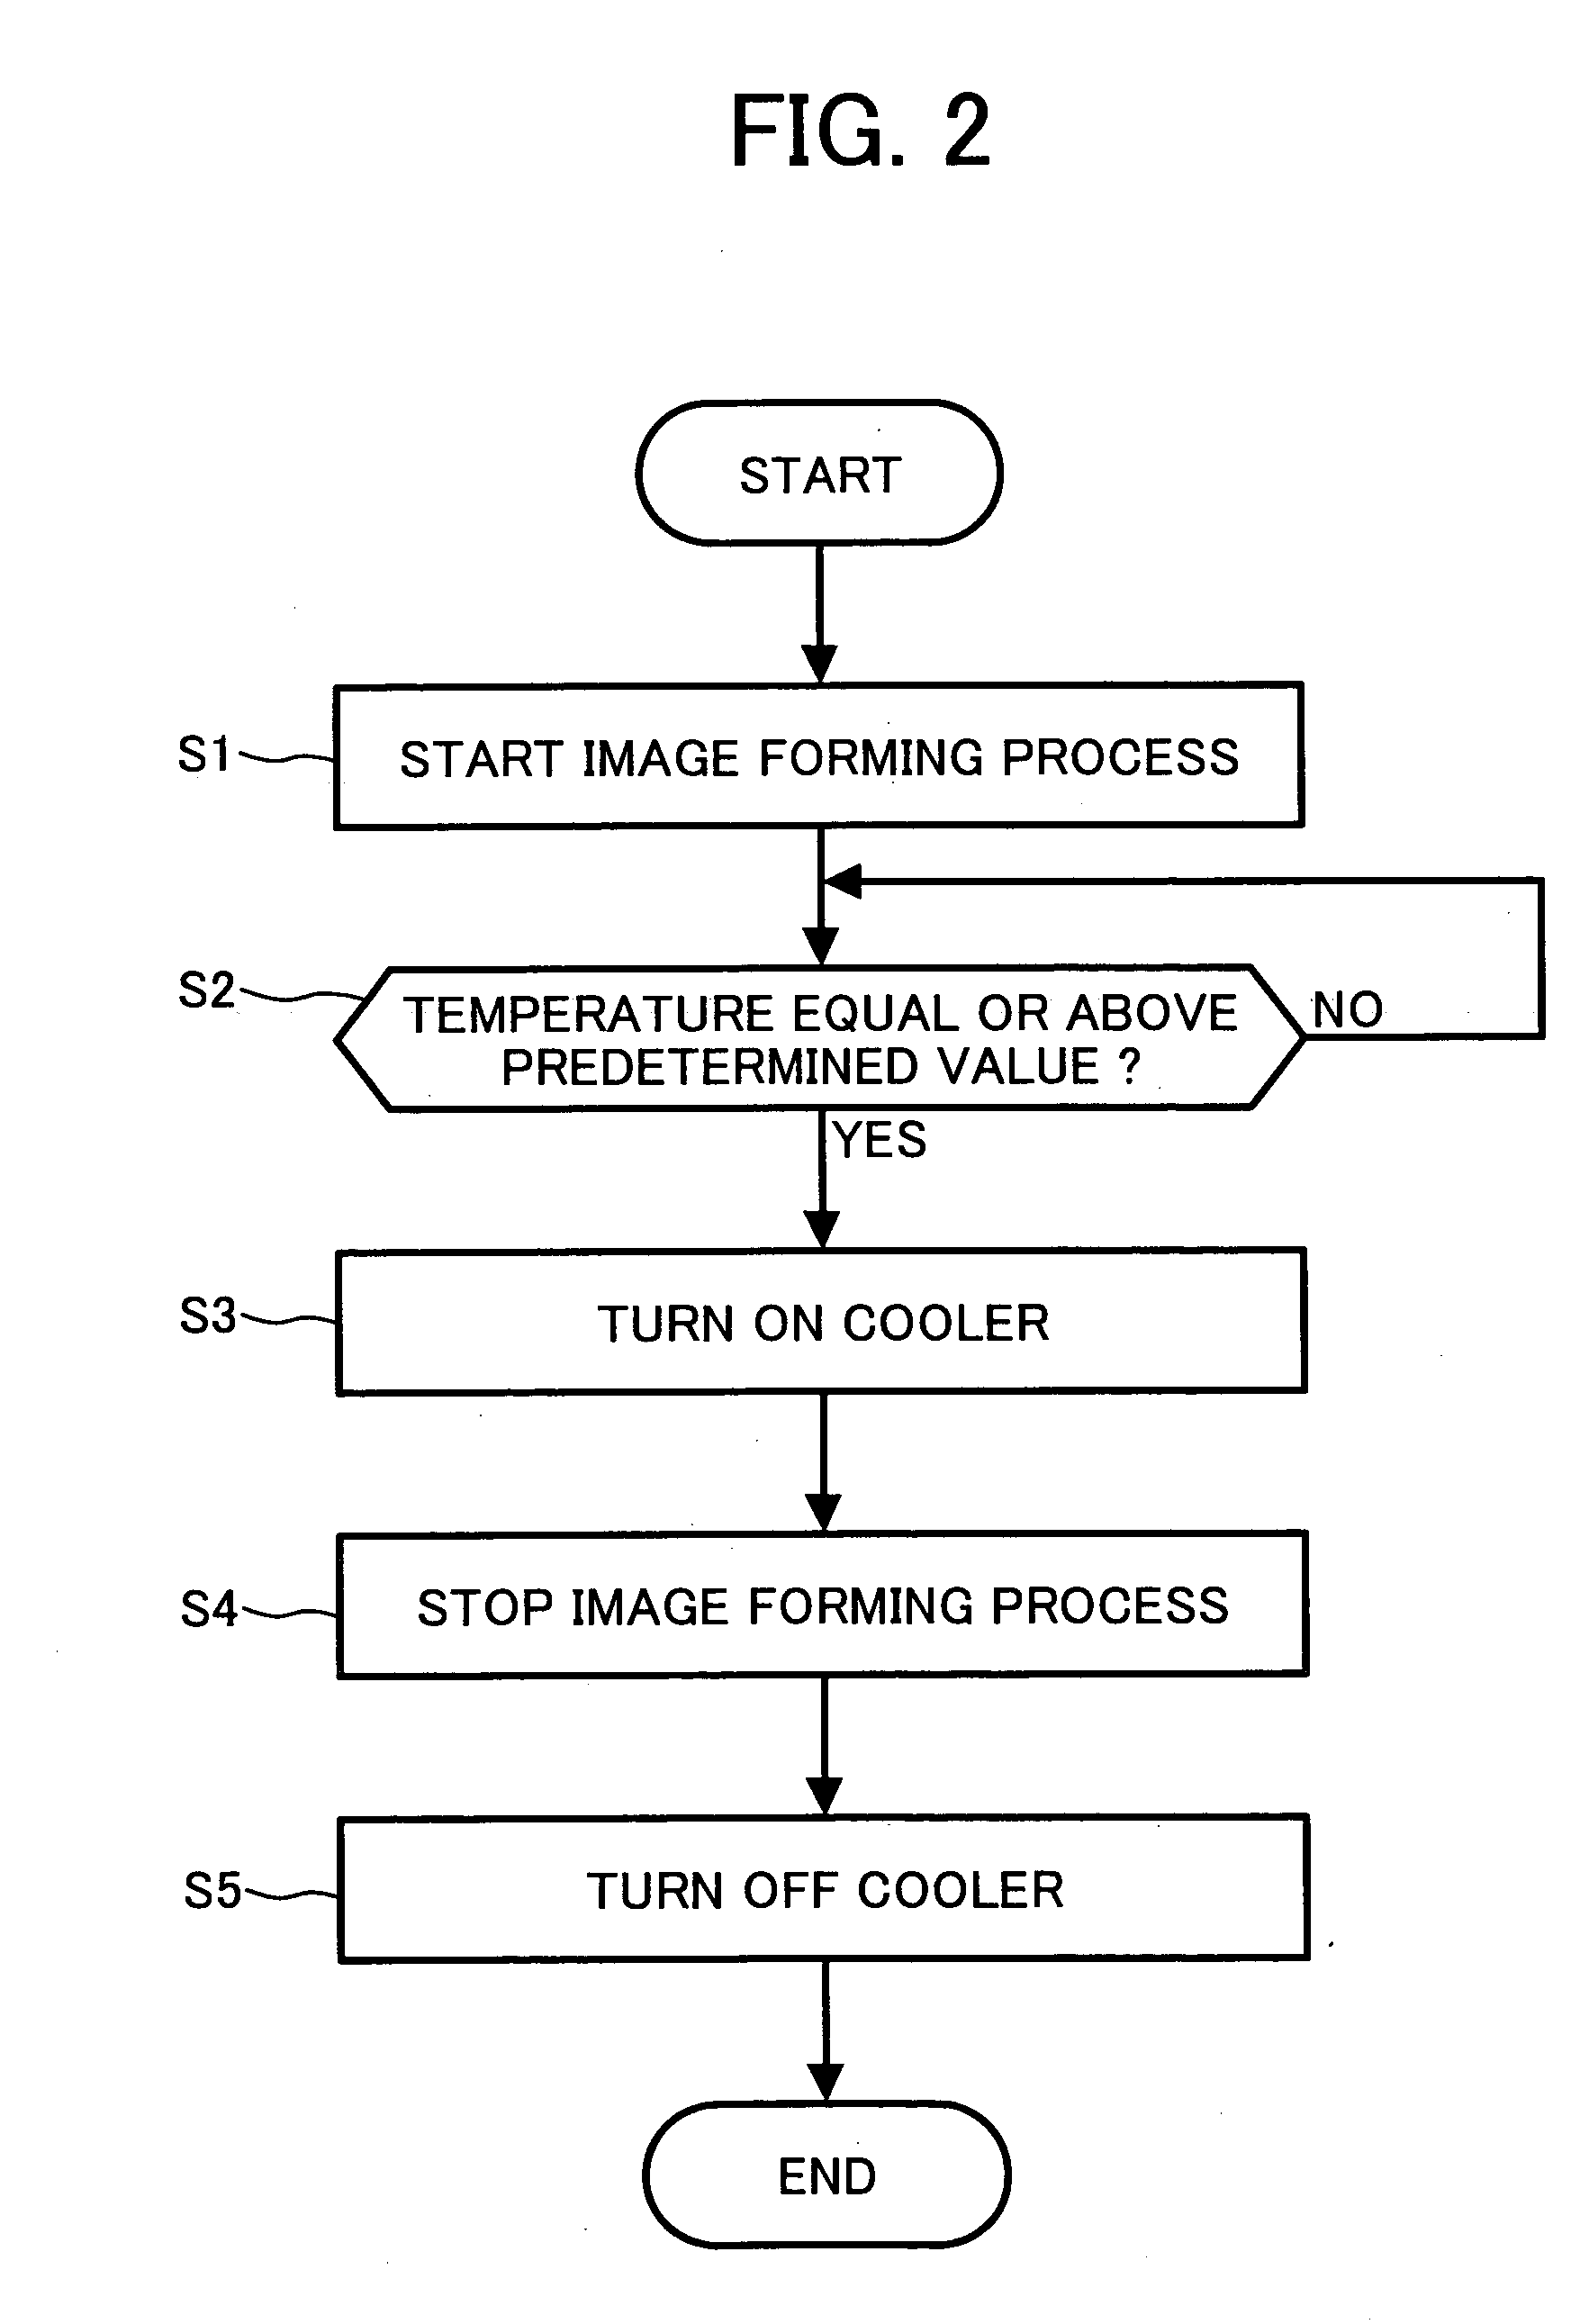 Apparatus and method for image forming capable of performing an improved image fixing using a cooler